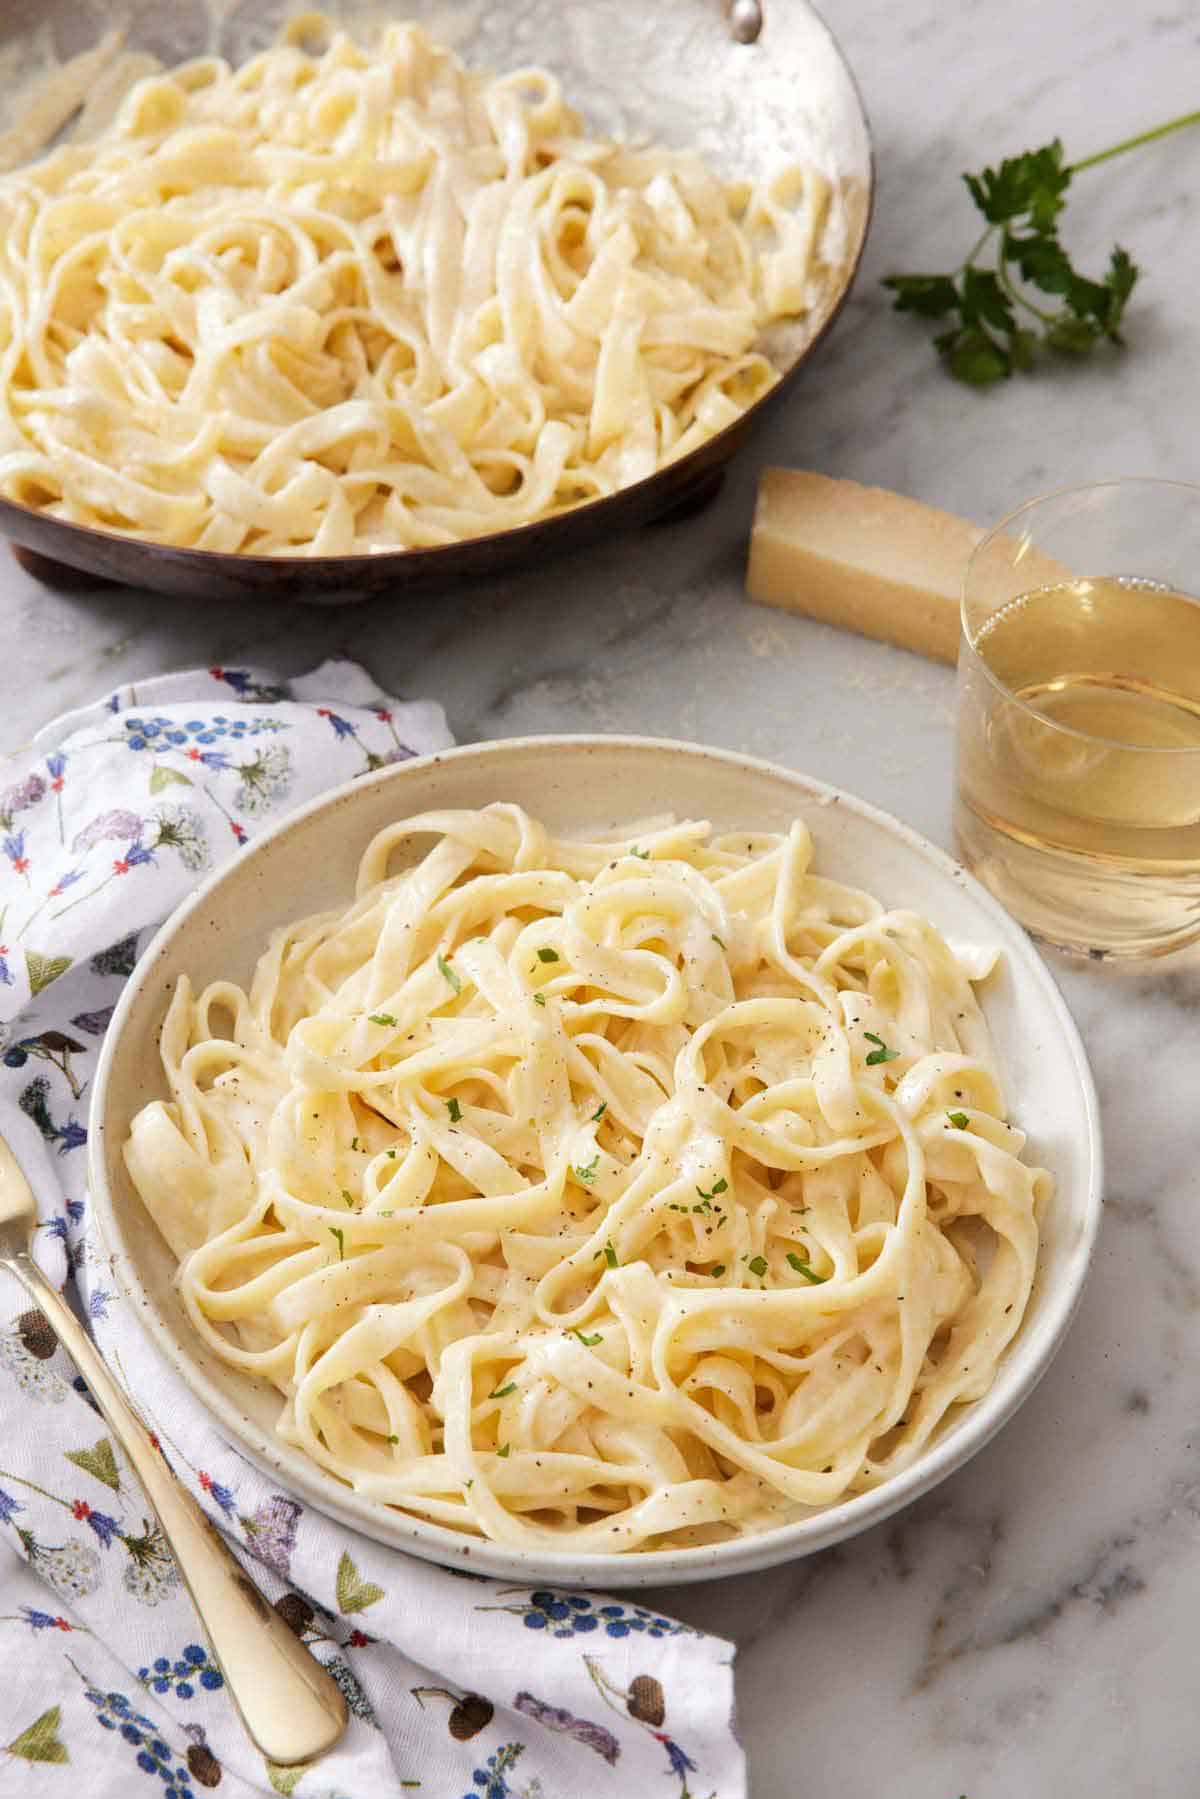 A bowl of fettucine alfredo garnished with chopped parsley with a glass of wine and a skillet with more pasta in the back.